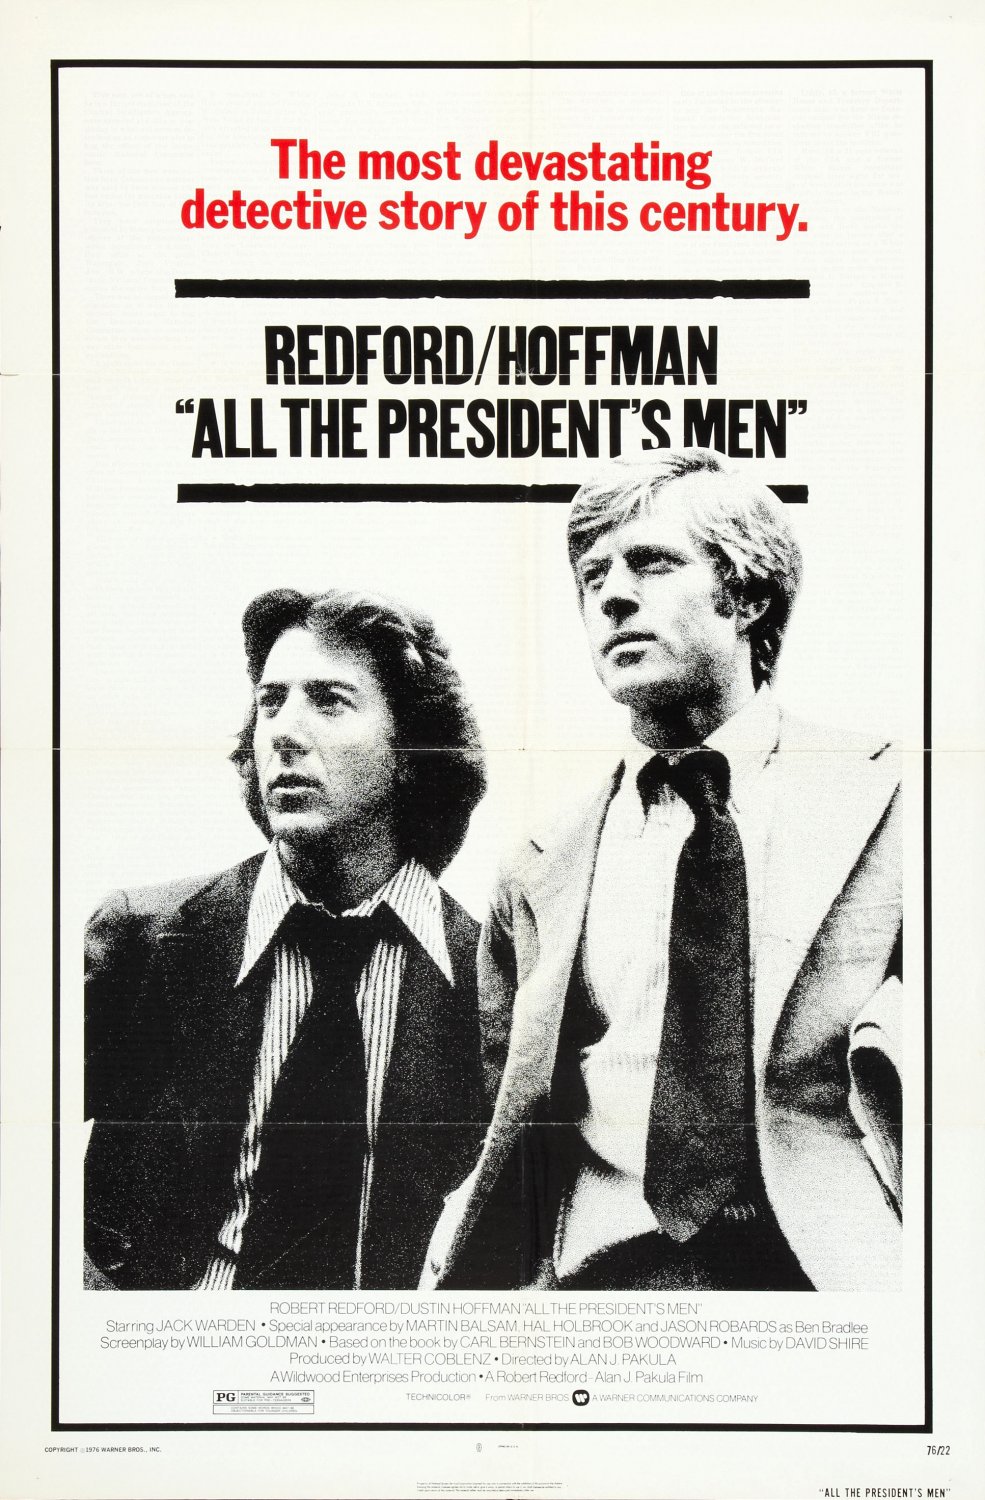 Movie Review: "All the President's Men" (1976)